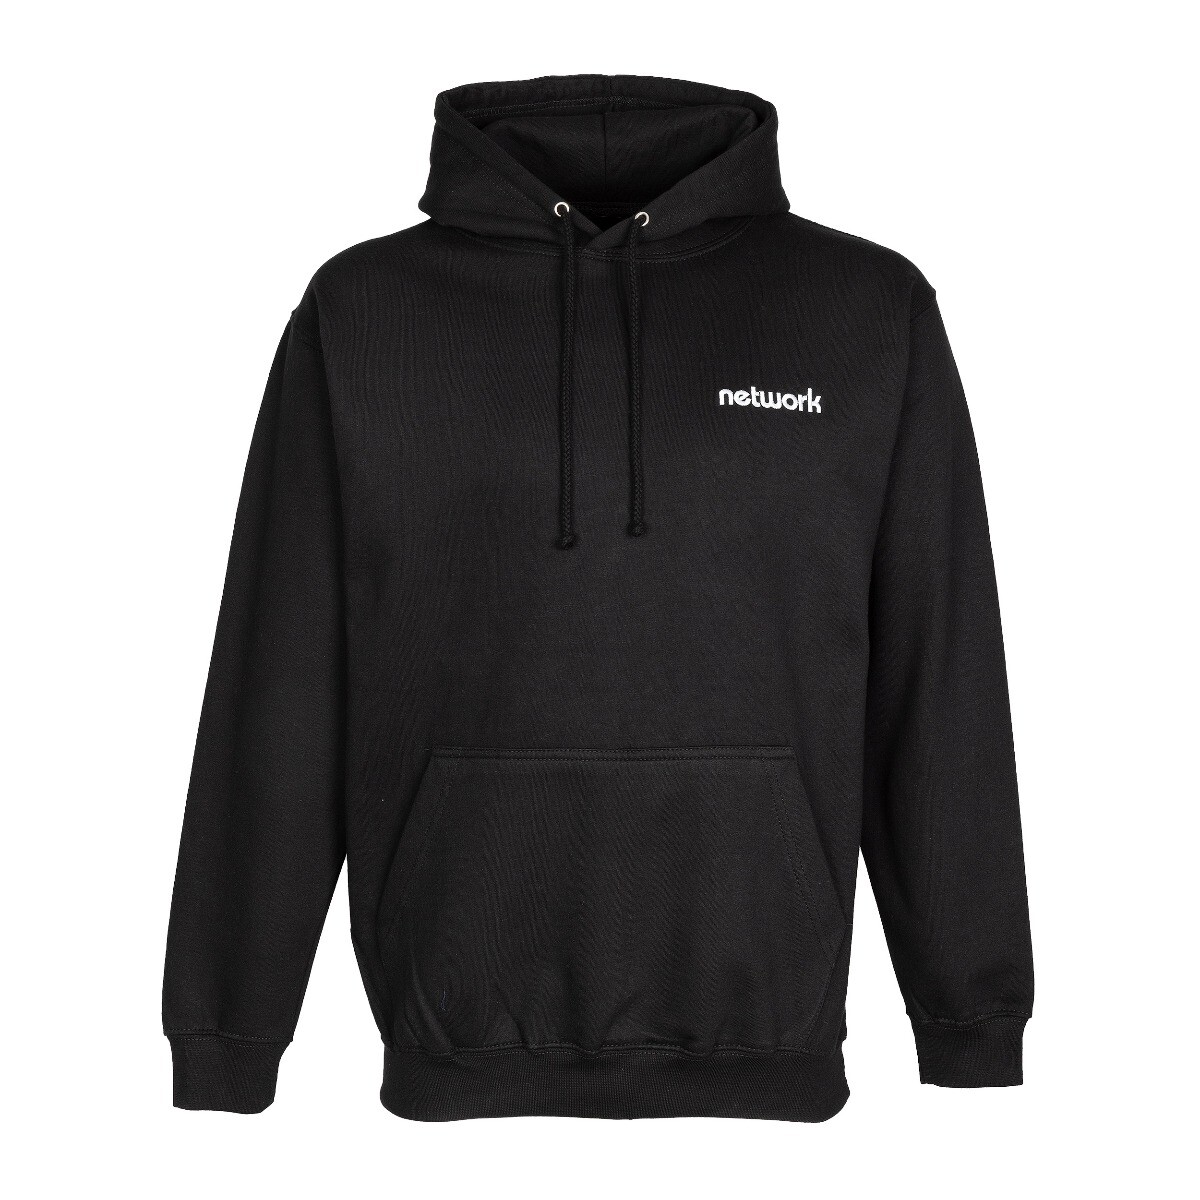 Network Scouts Adult Hoodie | Sizes 36